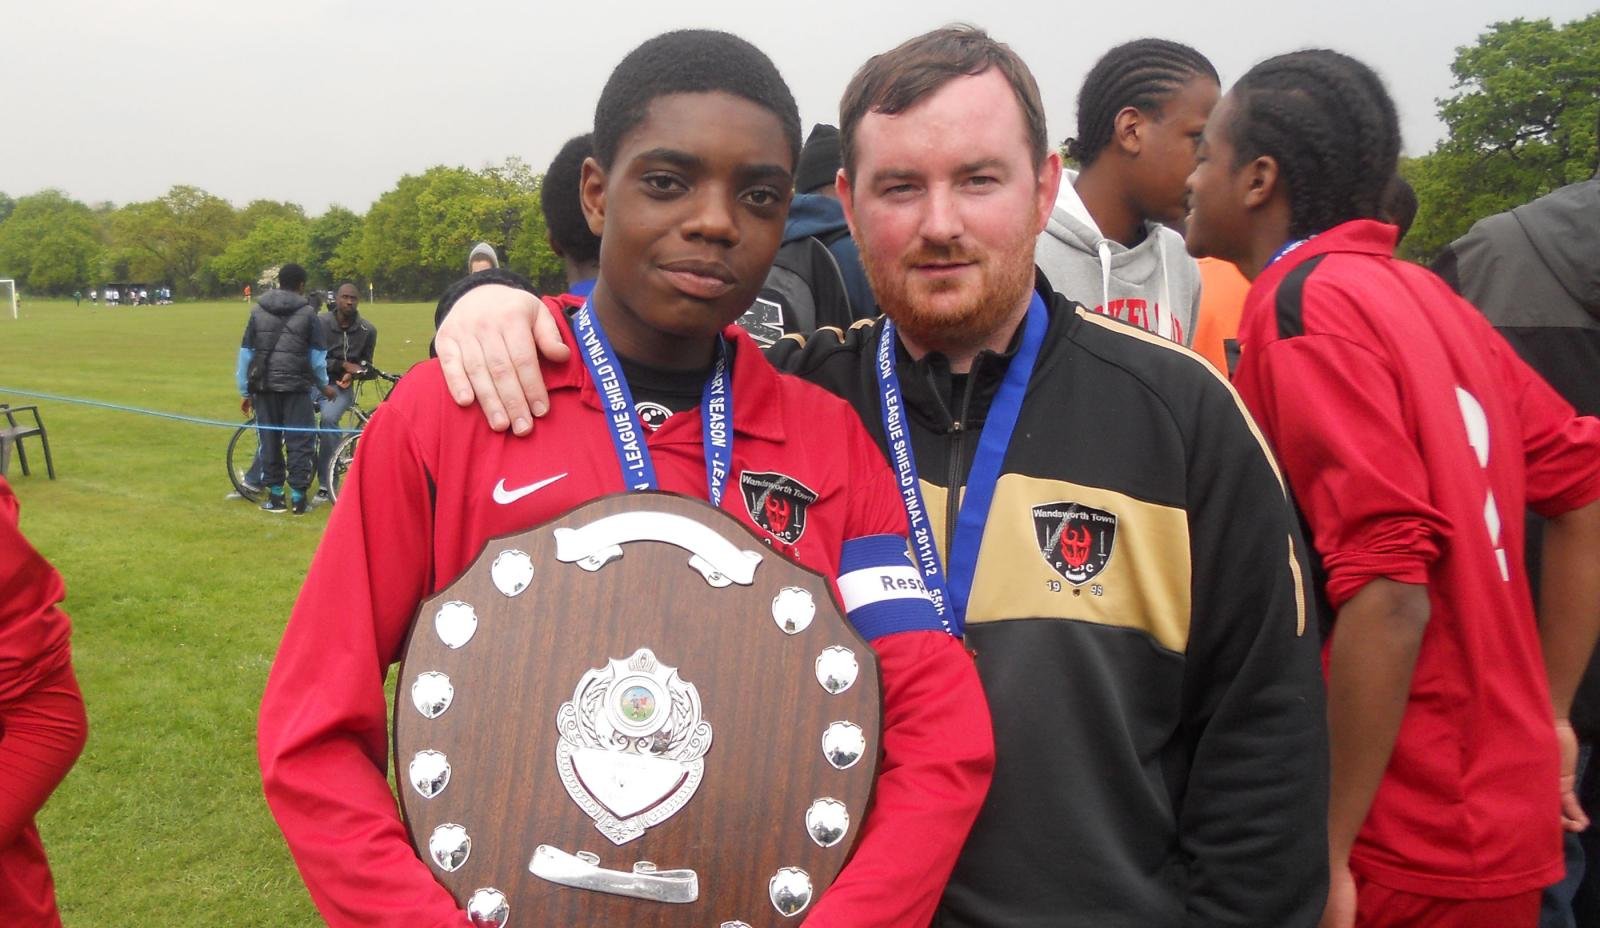 Wandsworth Town FC: A hotbed for grassroots talent